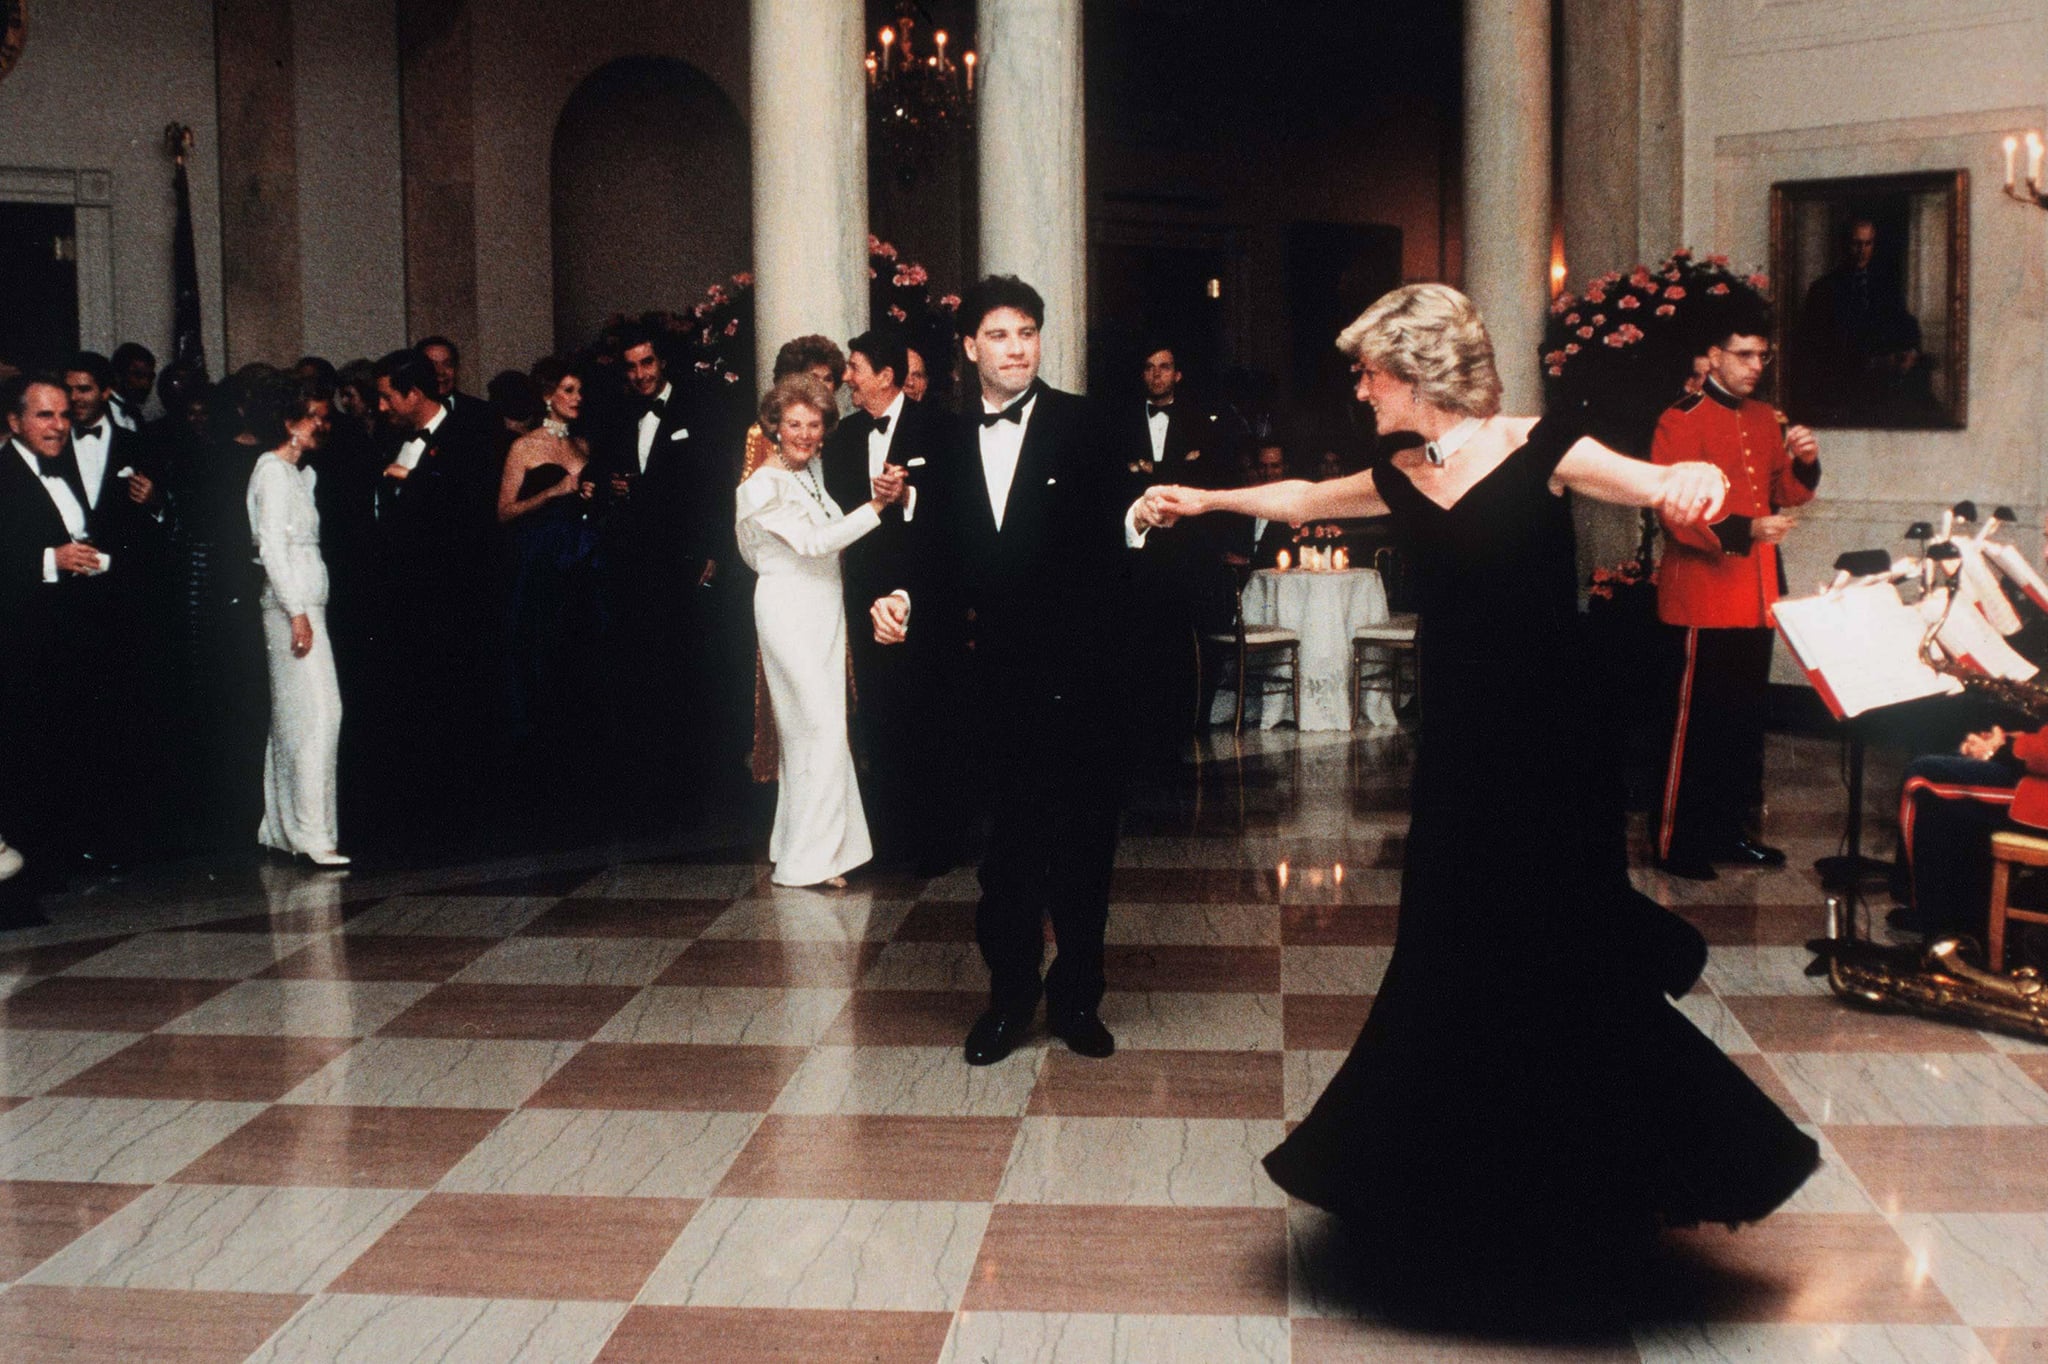 WASHINGTON, UNITED STATES - NOVEMBER 09:   (FILE PHOTO) Diana, Princess Of Wales, watched by President Ronald Reagan and wife Nancy,  dances with John Travolta at the White House, USA  on November 9, 1985.  Diana is wearing a midnight blue velvet dress by designer Victor Edelstein. (Photo by Anwar Hussein/WireImage)On July 1st  Diana, Princess Of Wales would have celebrated her 50th BirthdayPlease refer to the following profile on Getty Images Archival for further imagery. http://www.gettyimages.co.uk/Search/Search.aspx?EventId=107811125&EditorialProduct=ArchivalFor further images see also:Princess Diana:http://www.gettyimages.co.uk/Account/MediaBin/LightboxDetail.aspx?Id=17267941&MediaBinUserId=5317233Following Diana